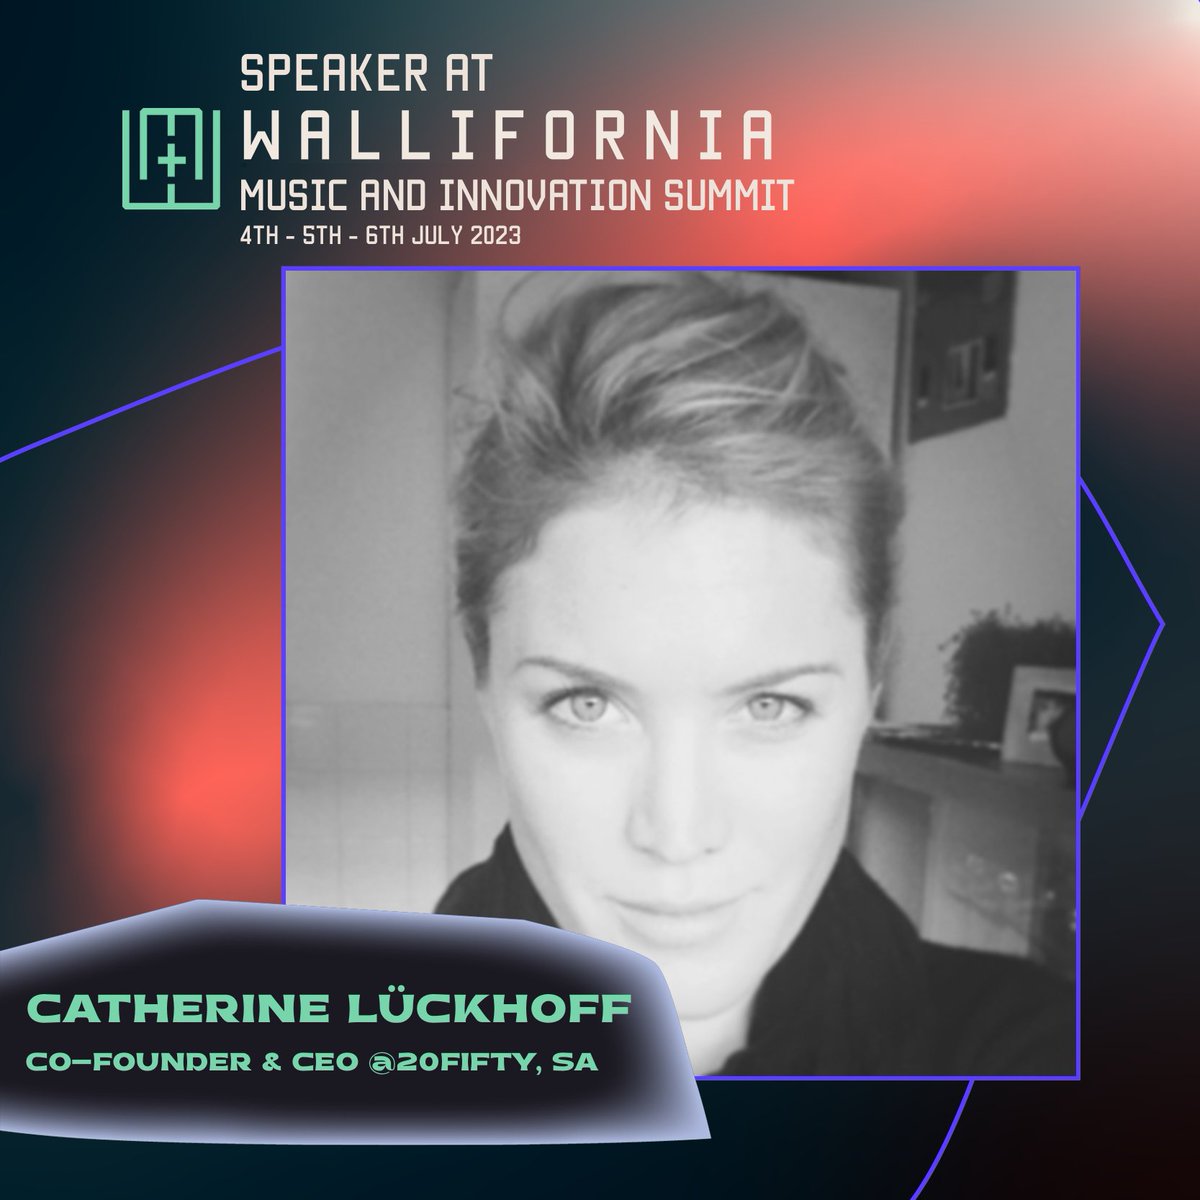 🥁NEW SPEAKER ANNOUNCEMENT🥁

@cluckhoff 

Don't miss the opportunity to meet her!  📷➡️lnkd.in/eJwFzBQM

#MusicTech #Wallifornia #Summit #WMT2023 #investing #venturing #connecting